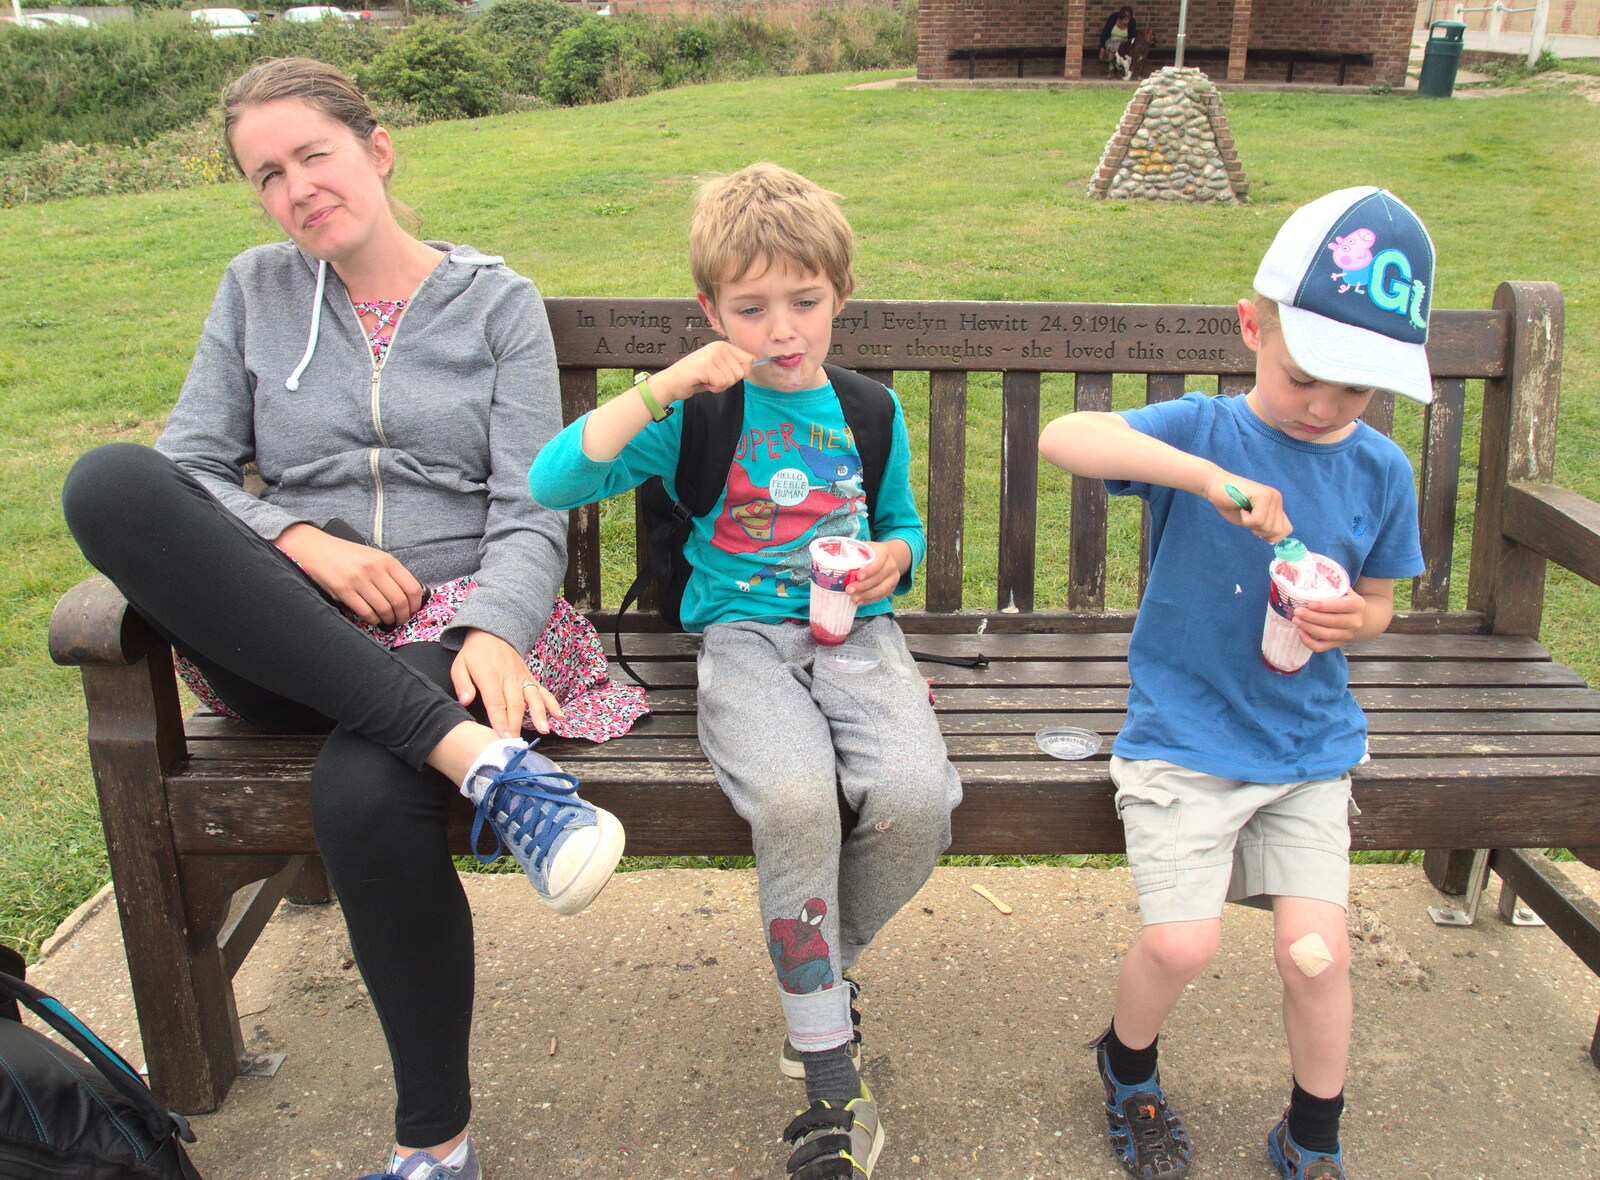 Camping in West Runton, North Norfolk - 30th July 2016: The gang eat ice cream